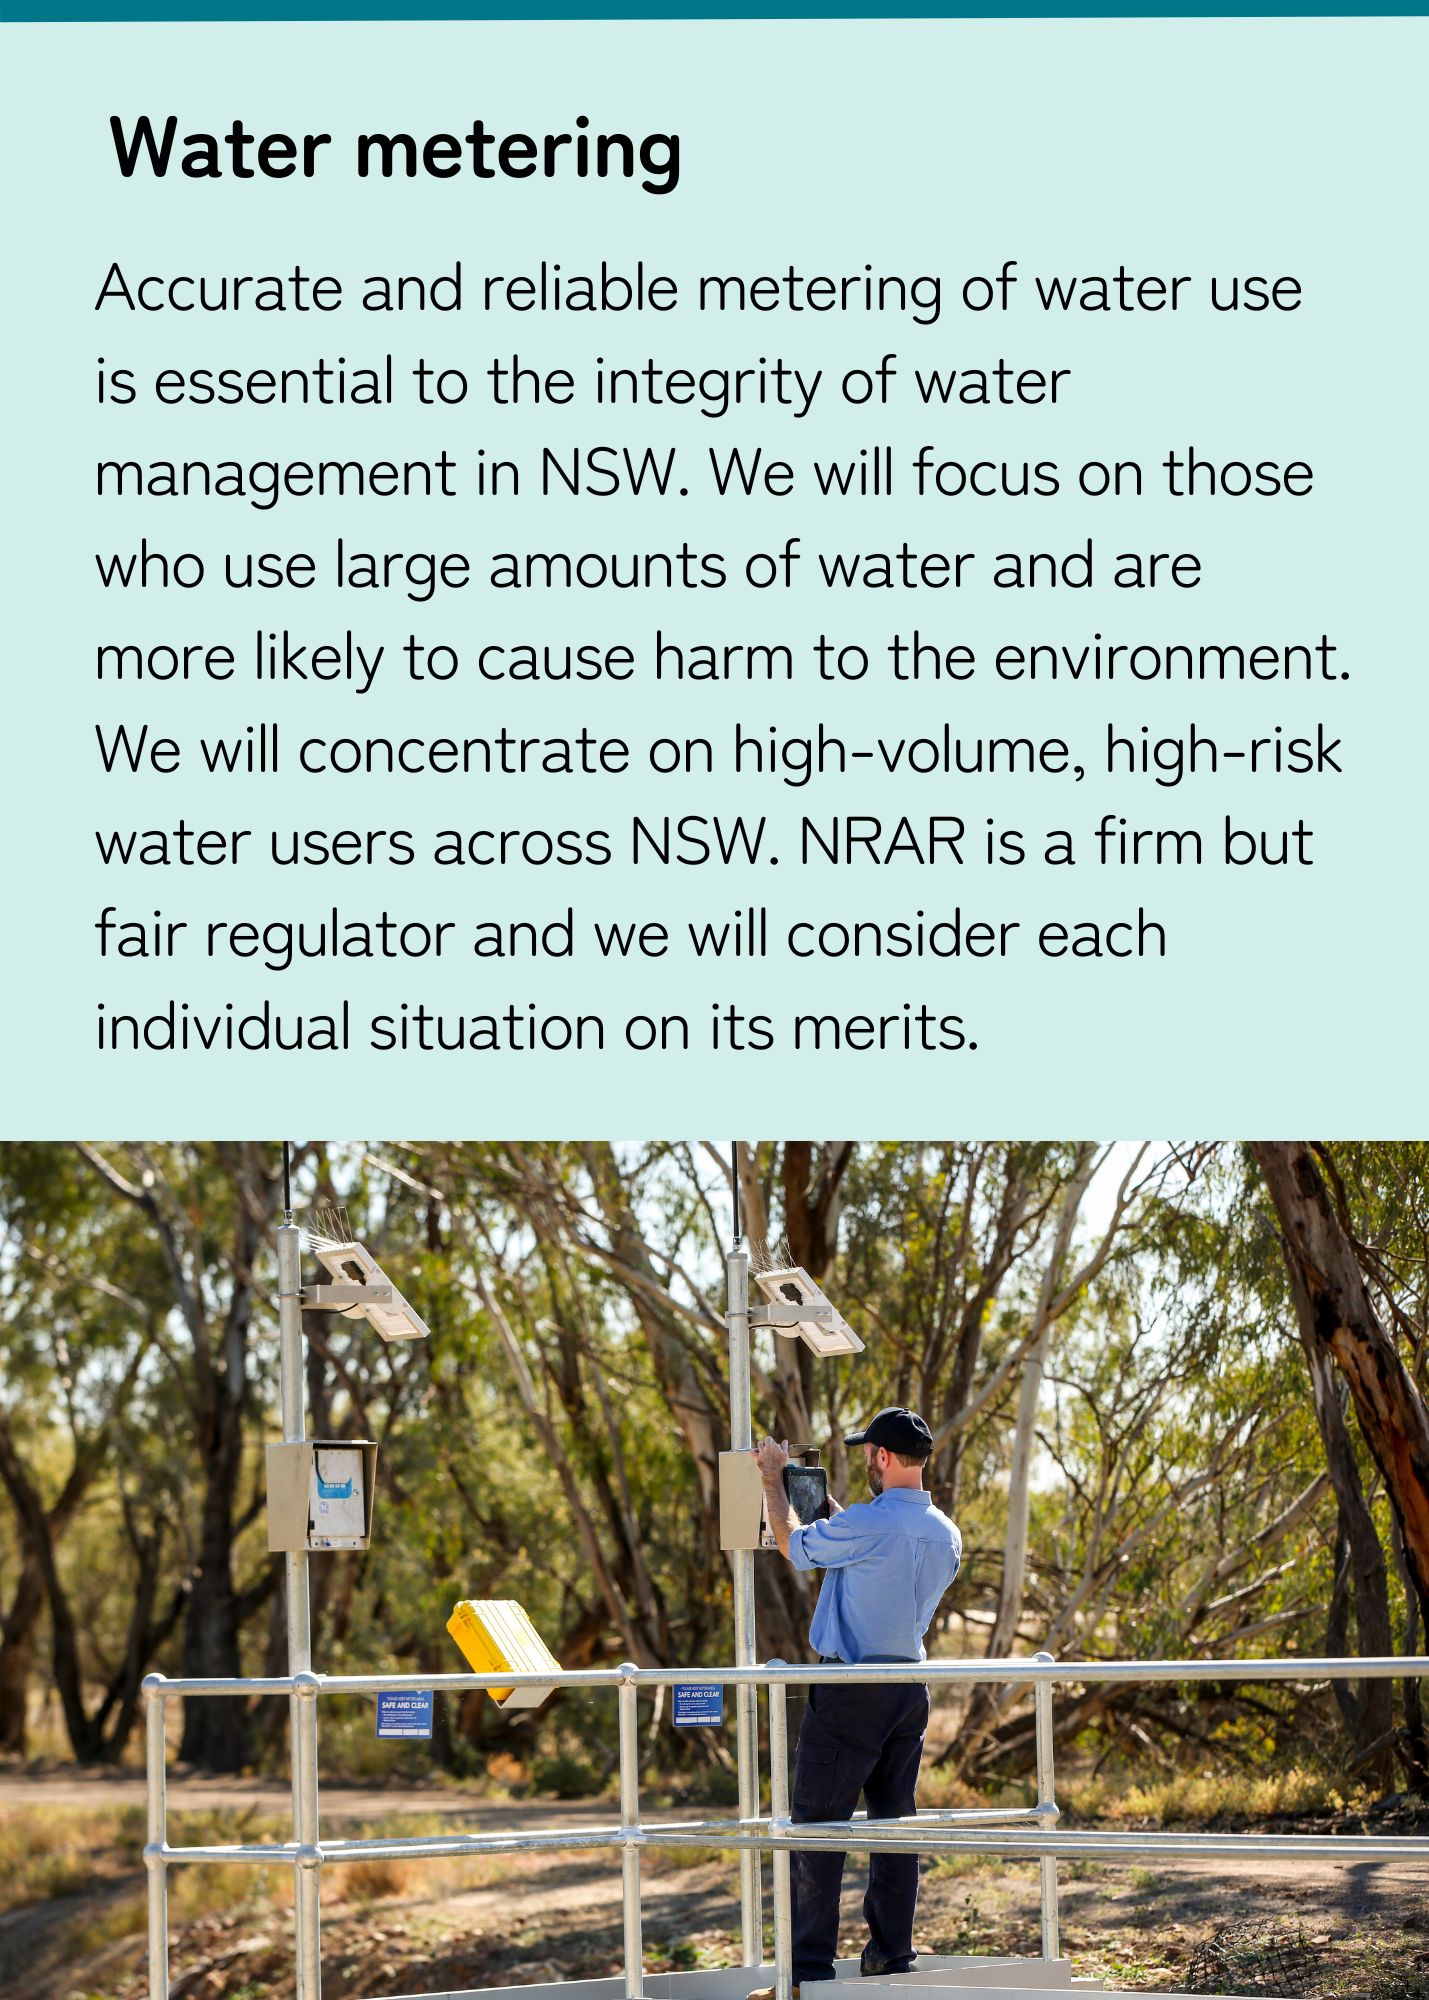 Accurate and reliable metering of water use is essential to the integrity of water management in NSW. We will focus on those who use large amounts of water and are more likely to cause harm to the environment. We will concentrate on high-volume, high-risk water users across NSW. 